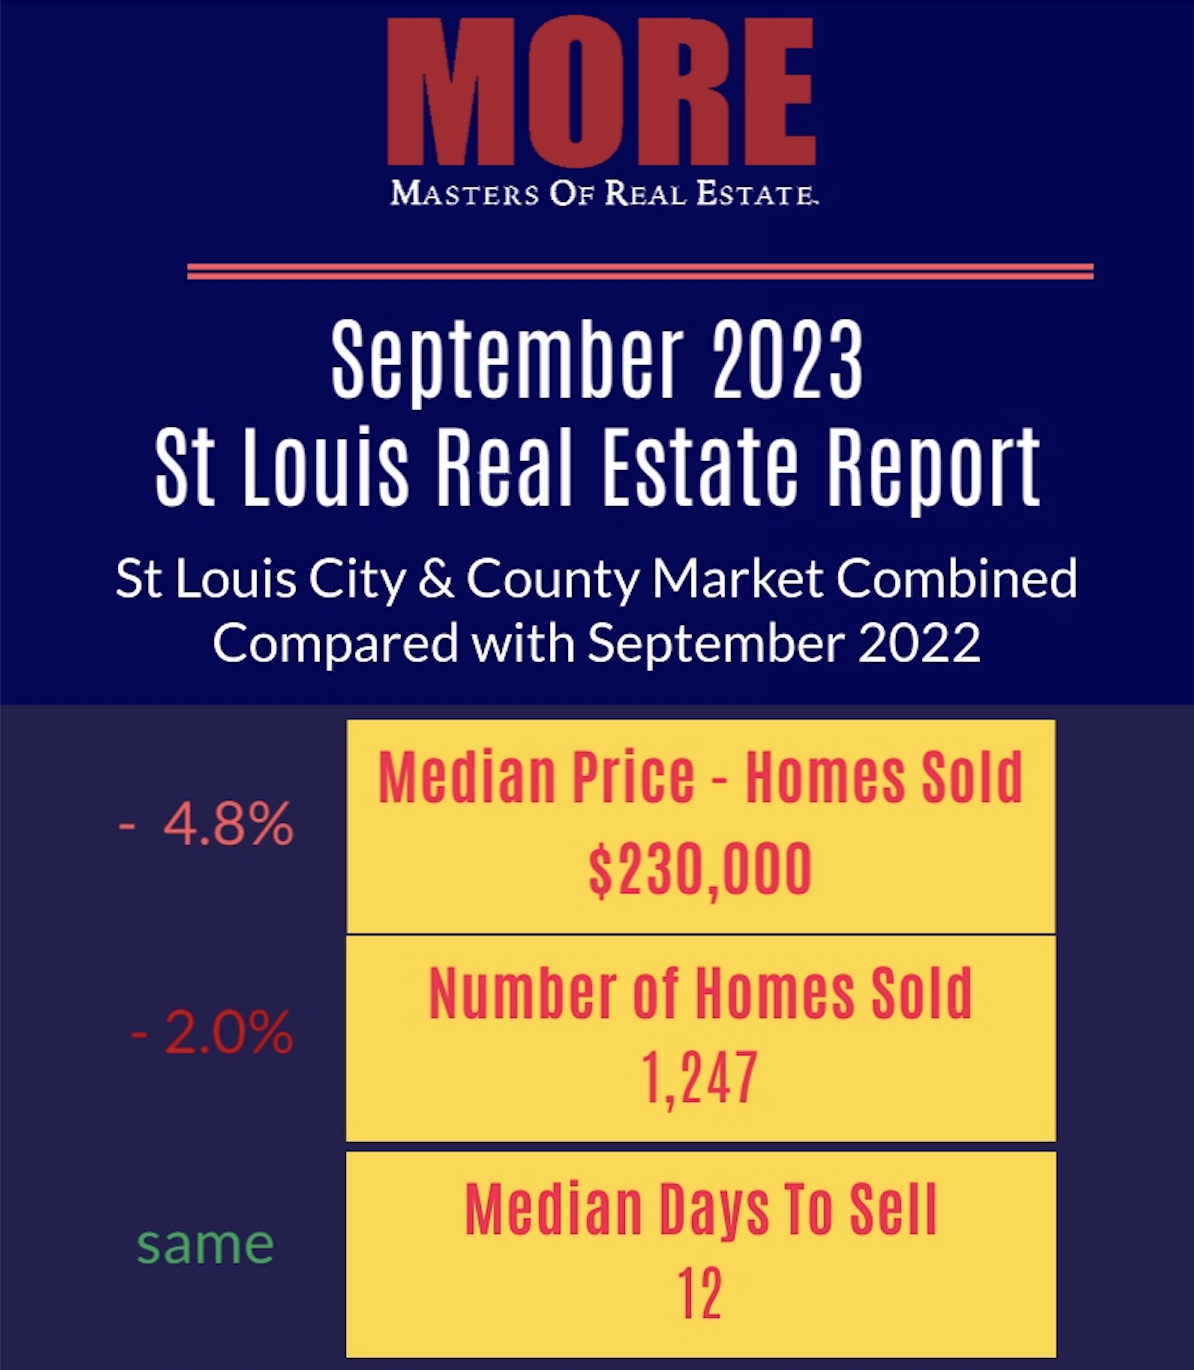 St Louis Real Estate Report for September 2023